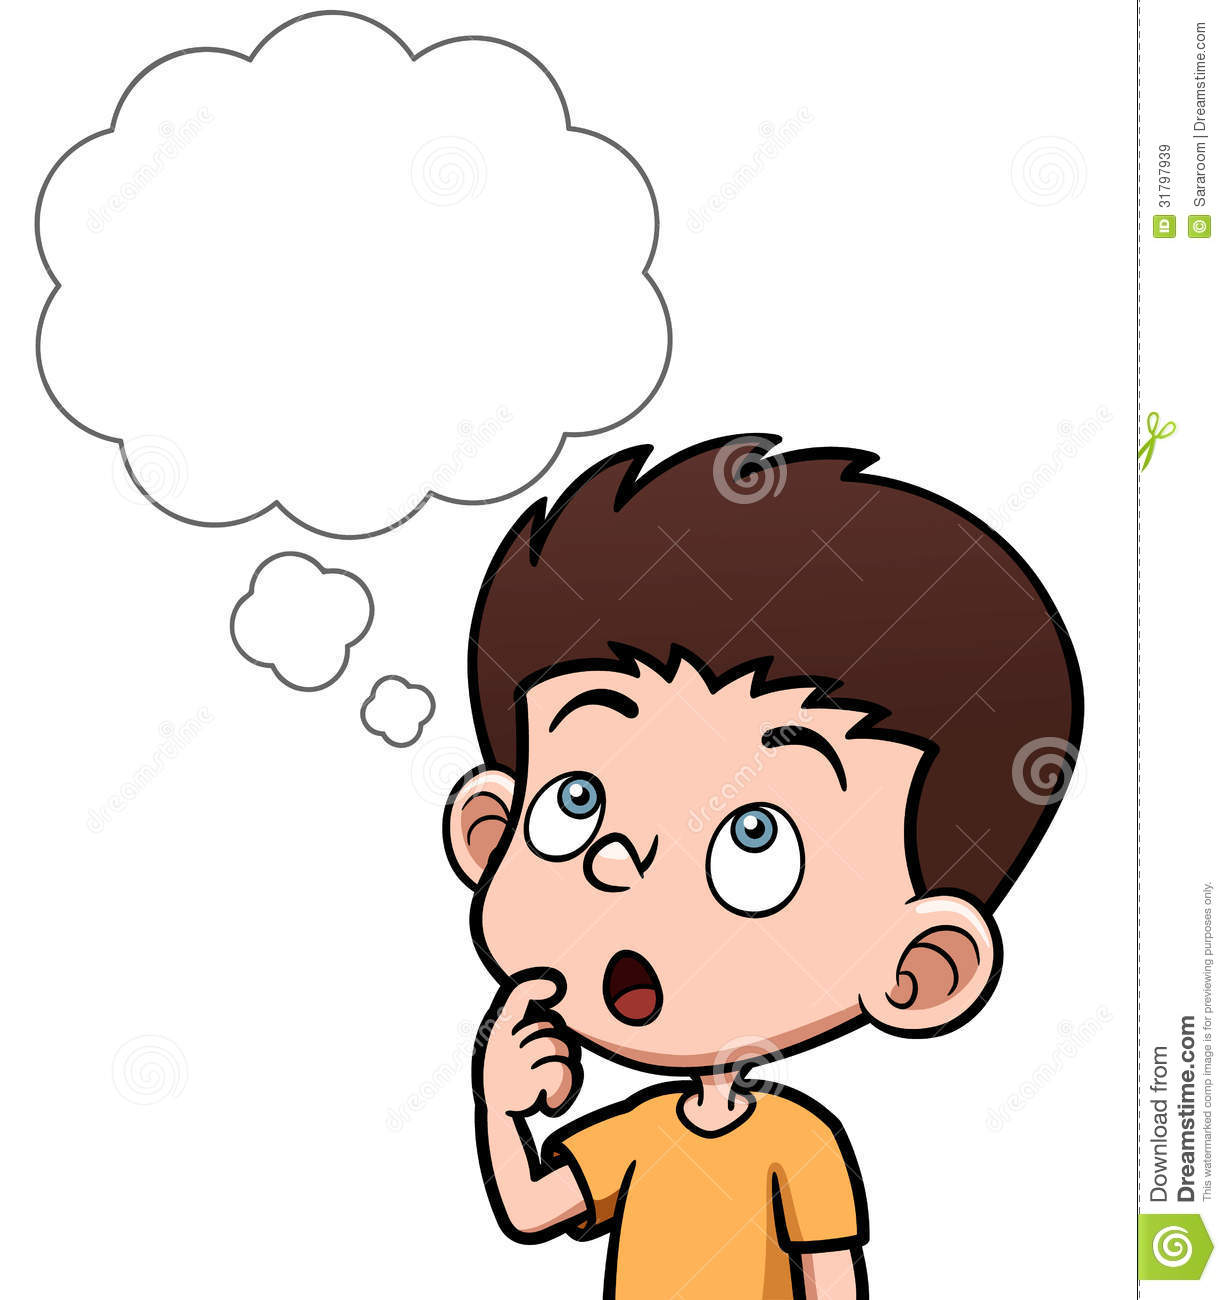 Cartoon Boy Thinking With White Bubble Royalty Free Stock Images